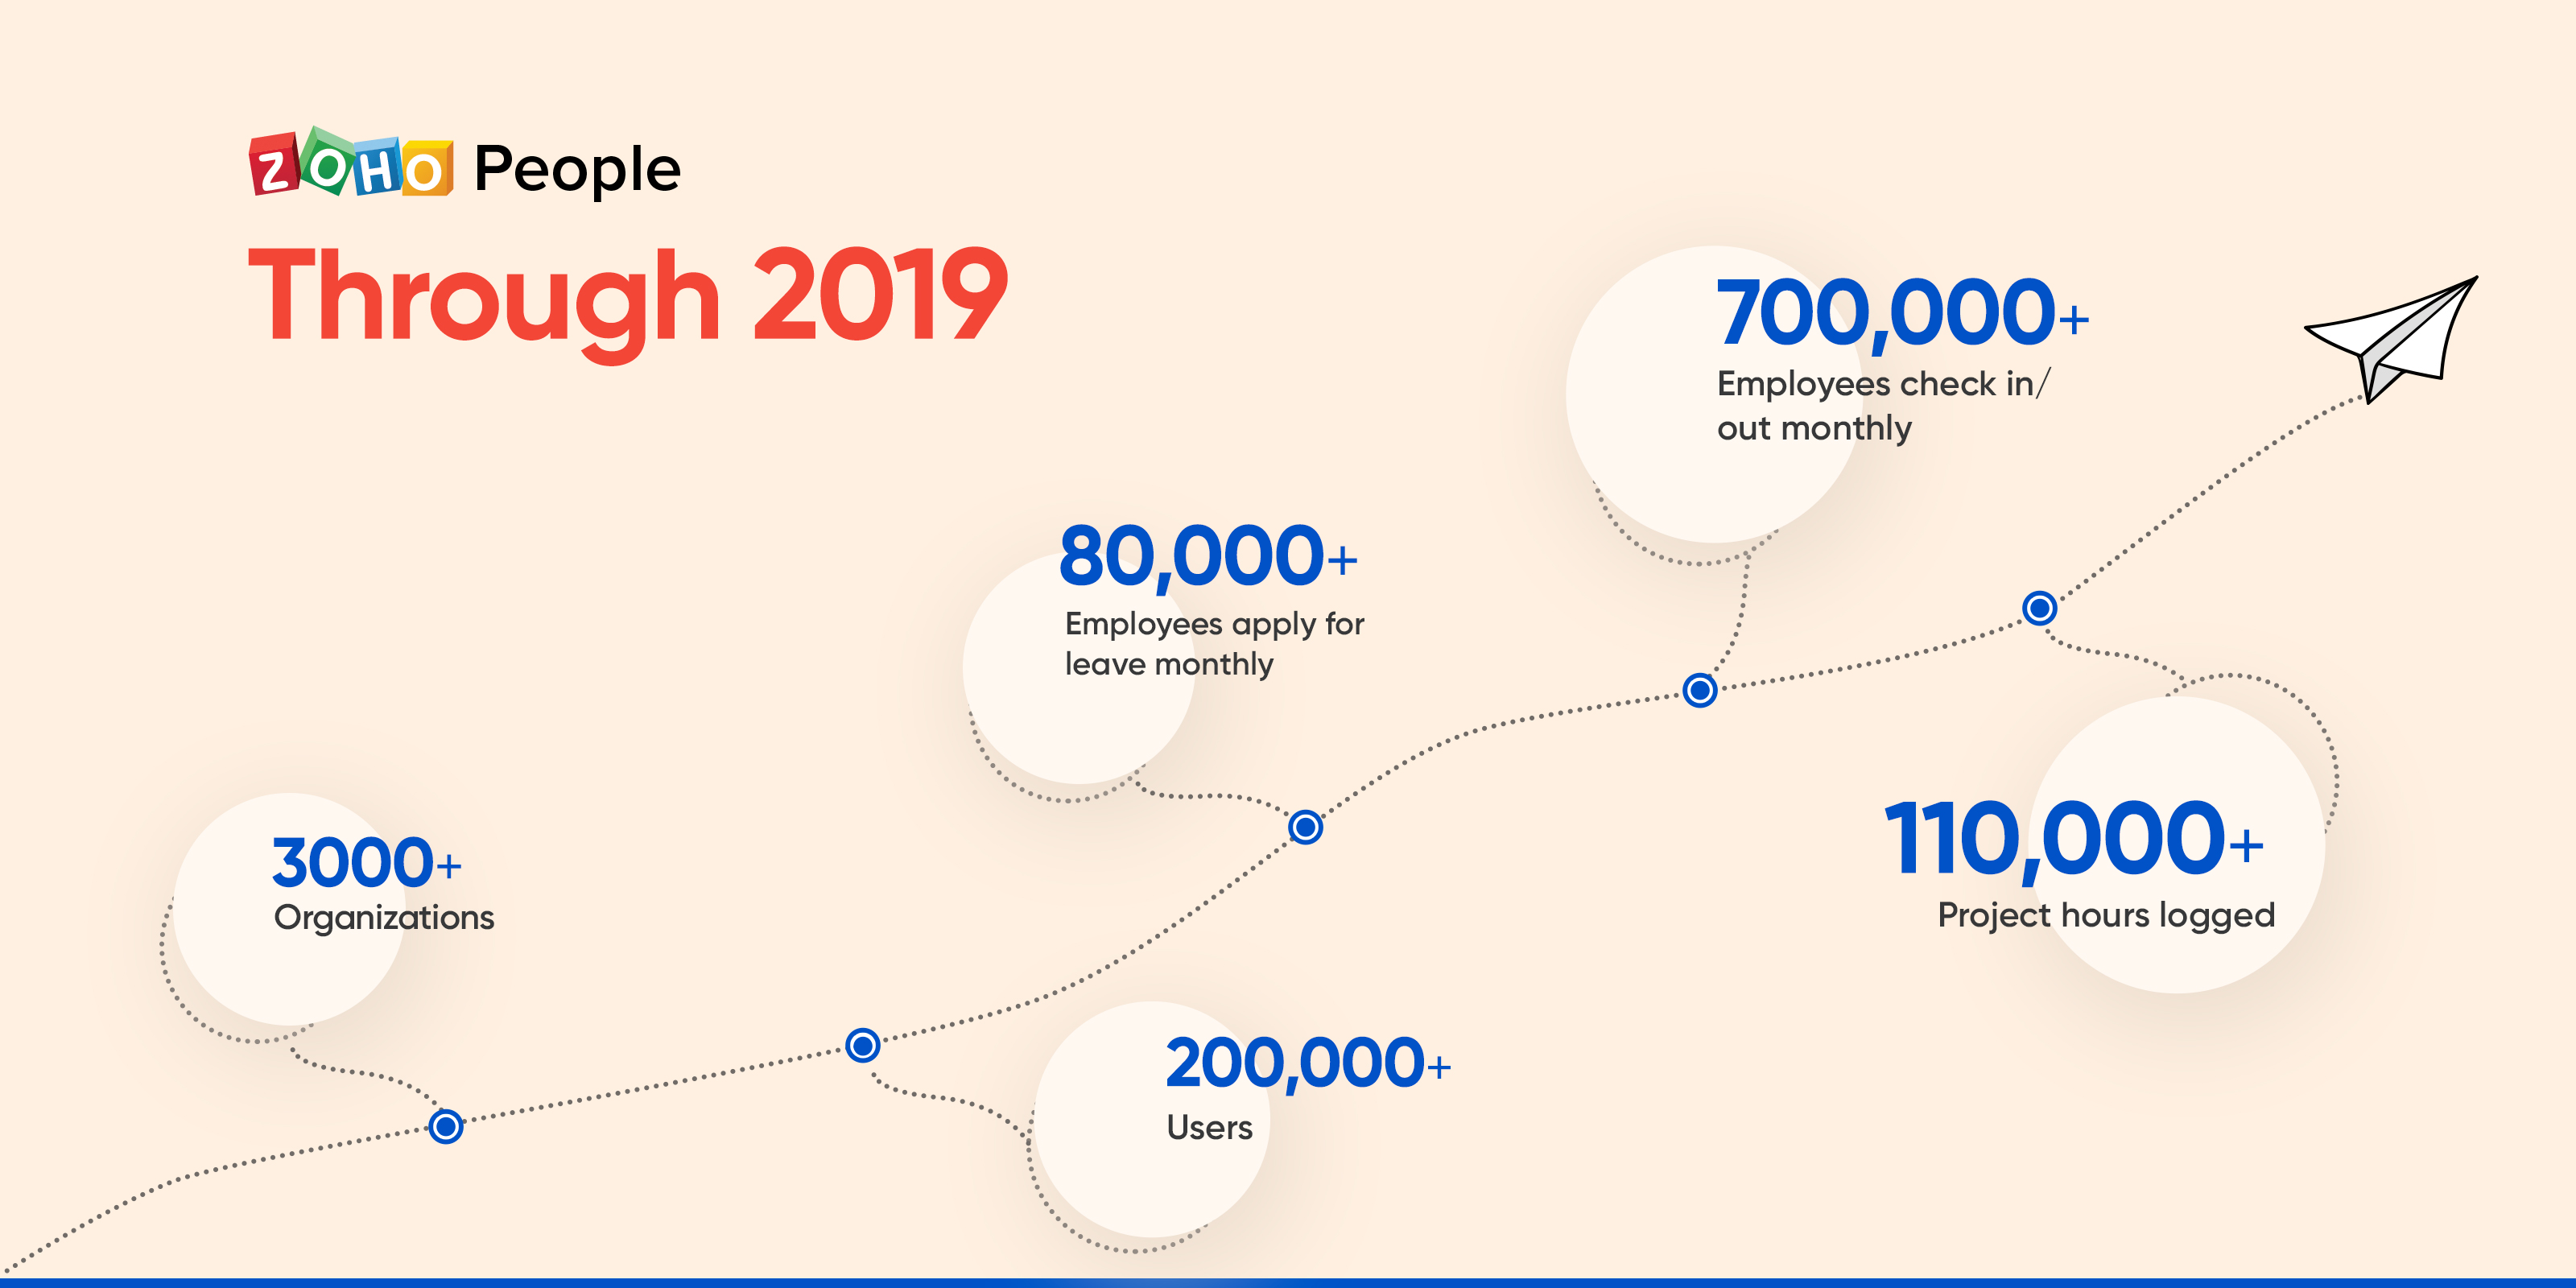 Year in Review: Zoho People in 2019 